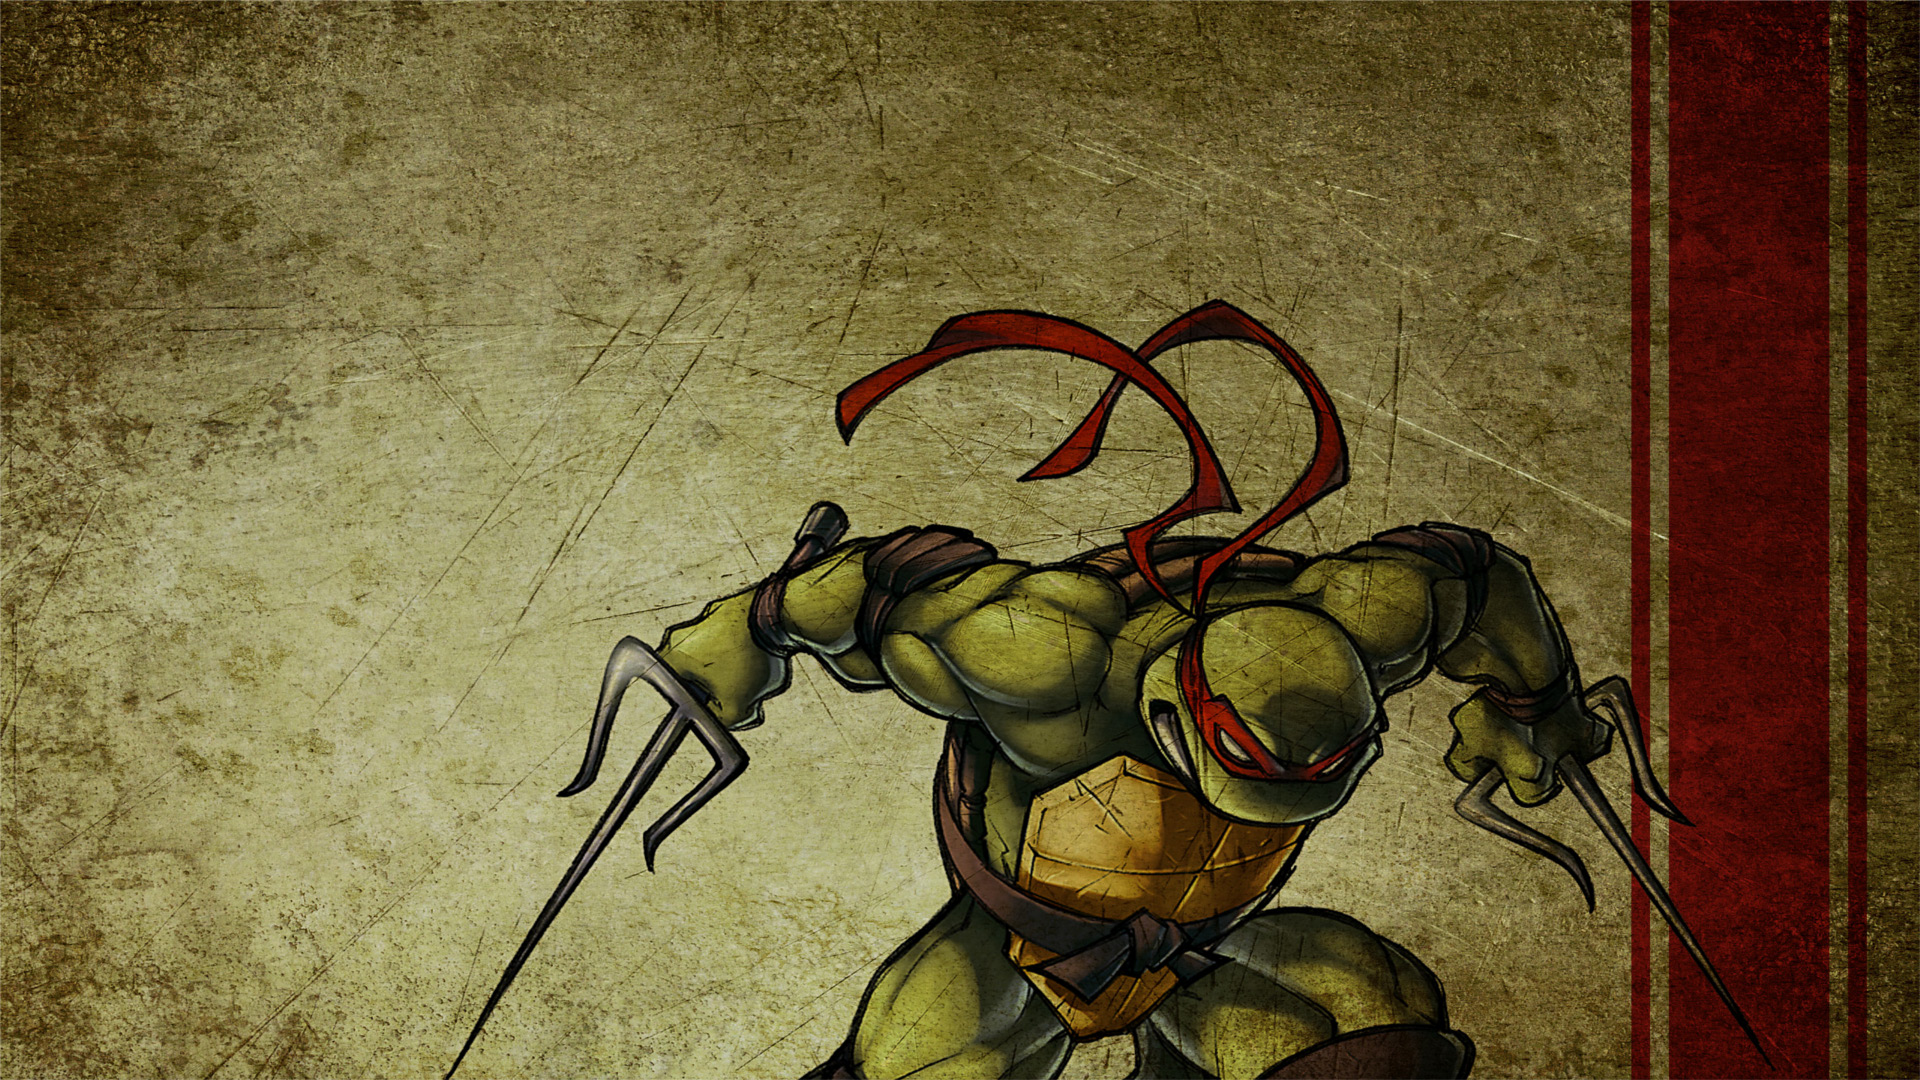 Raphael from TMNT in action.